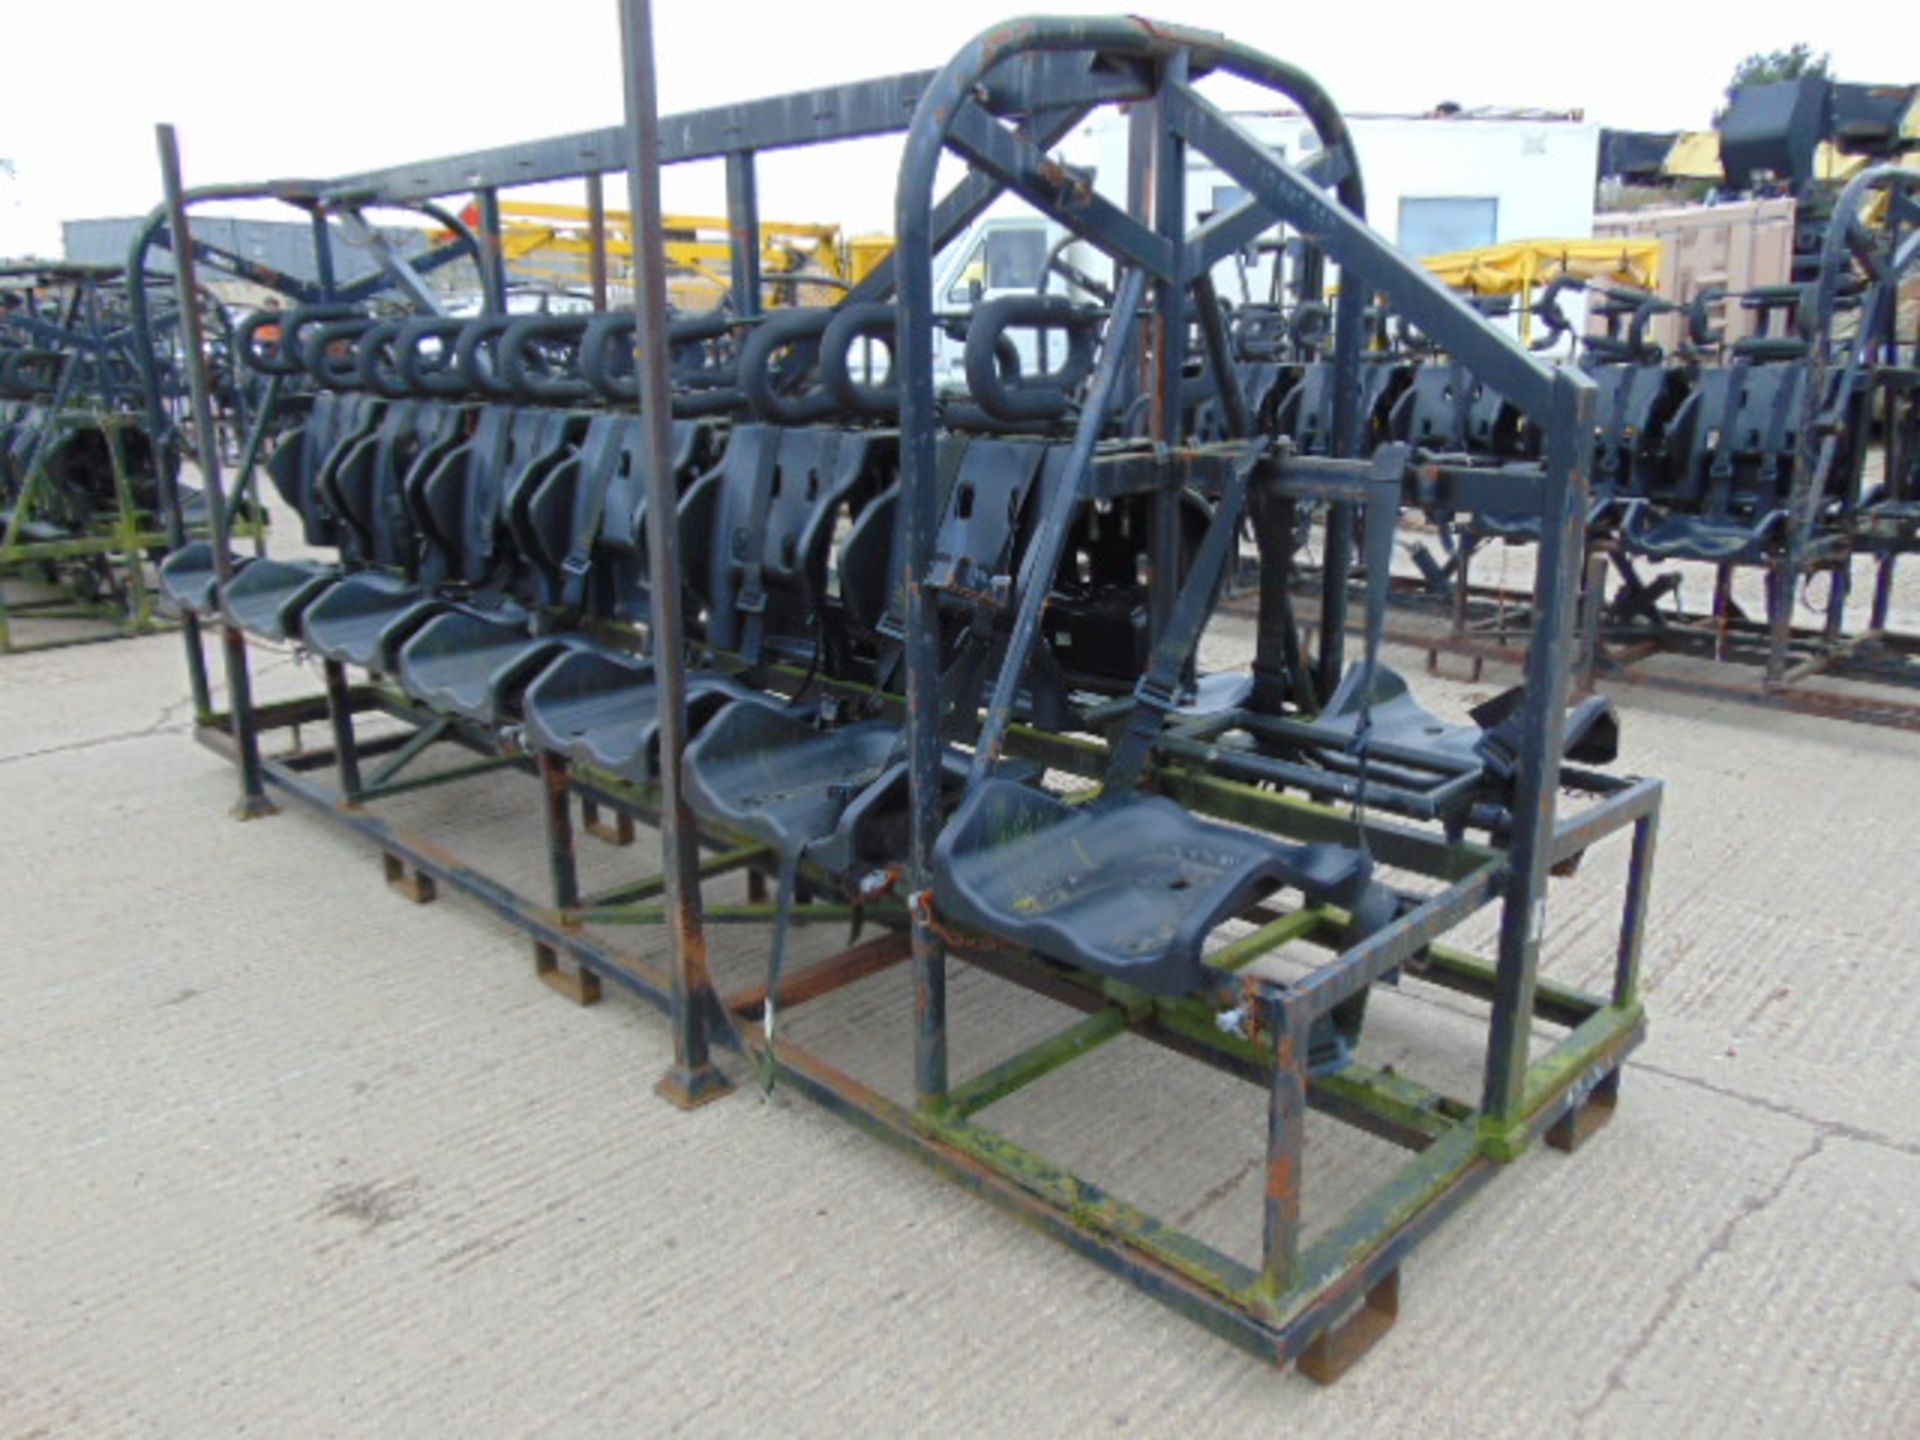 14 Man ROPS Security Seat suitable for Leyland Dafs, Bedfords etc - Image 2 of 5